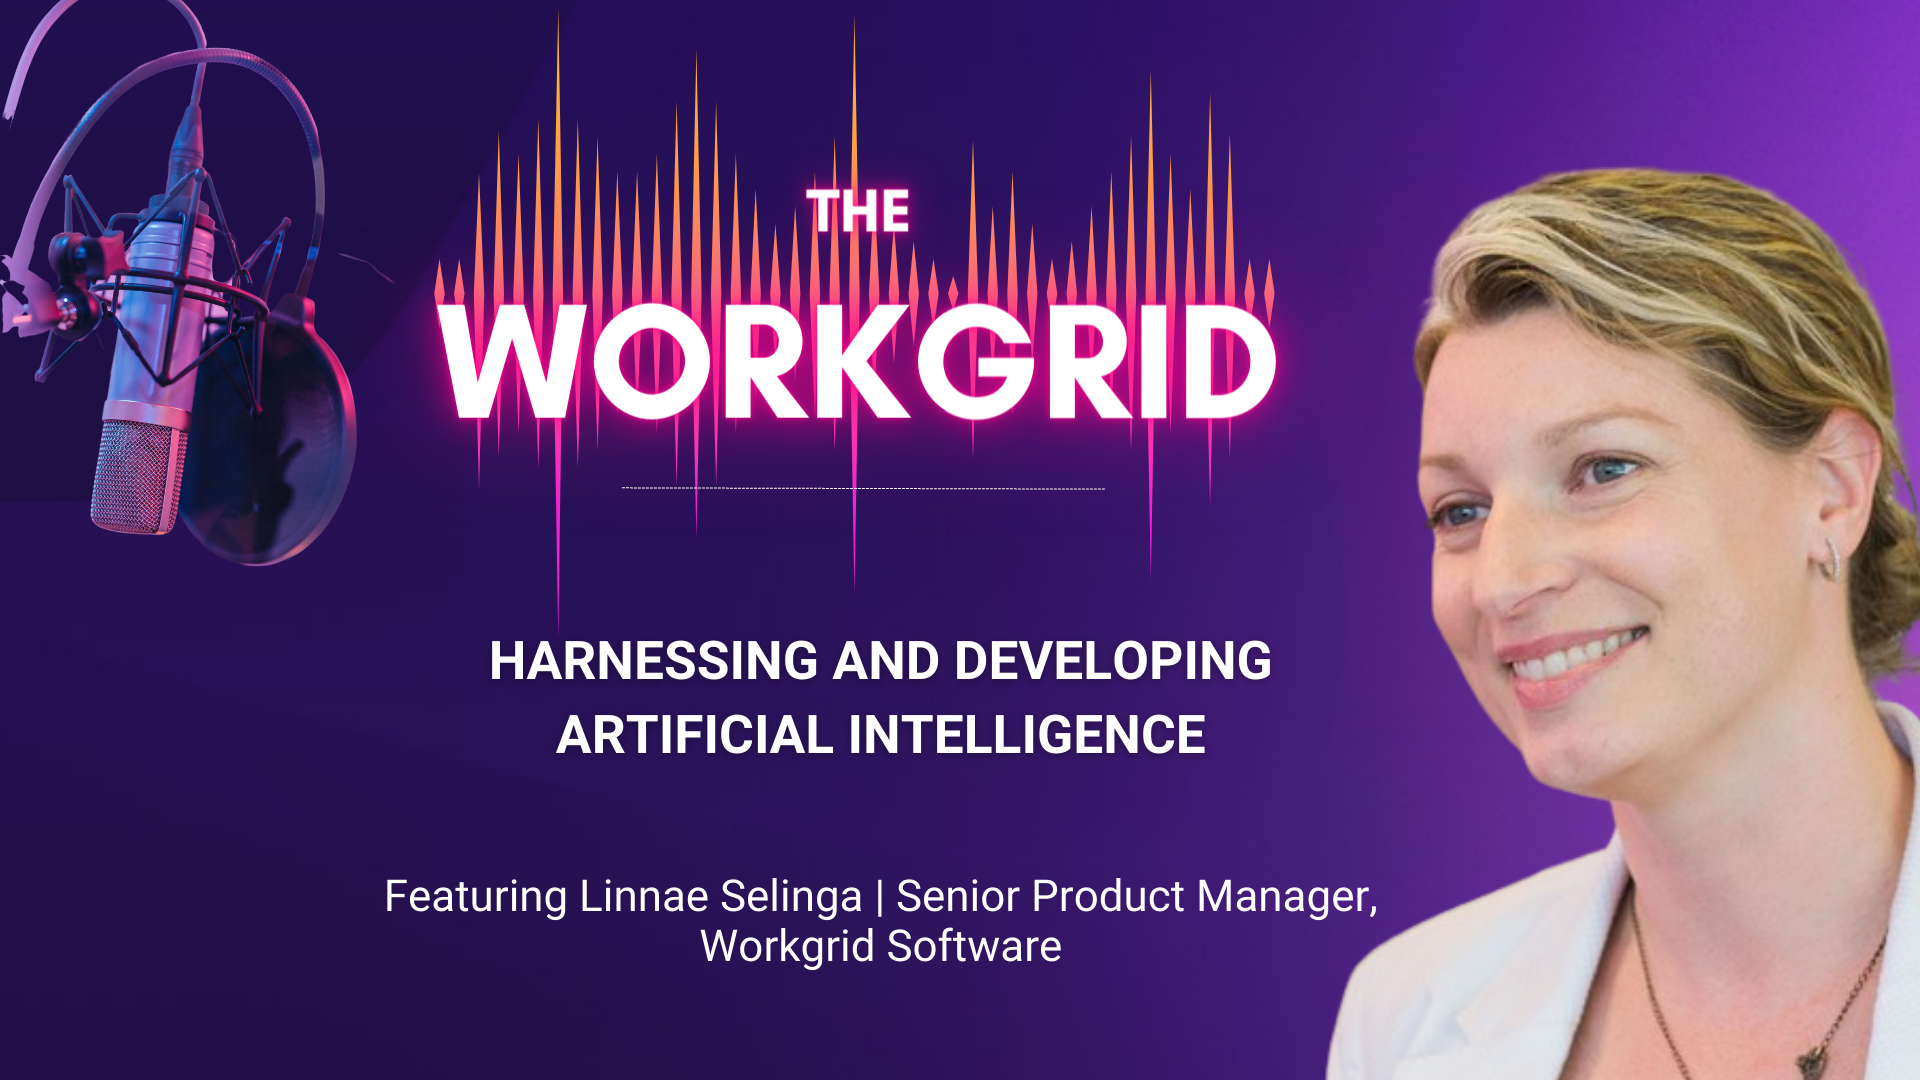 Linnae Selinga | Harnessing and Developing Artificial Intelligence